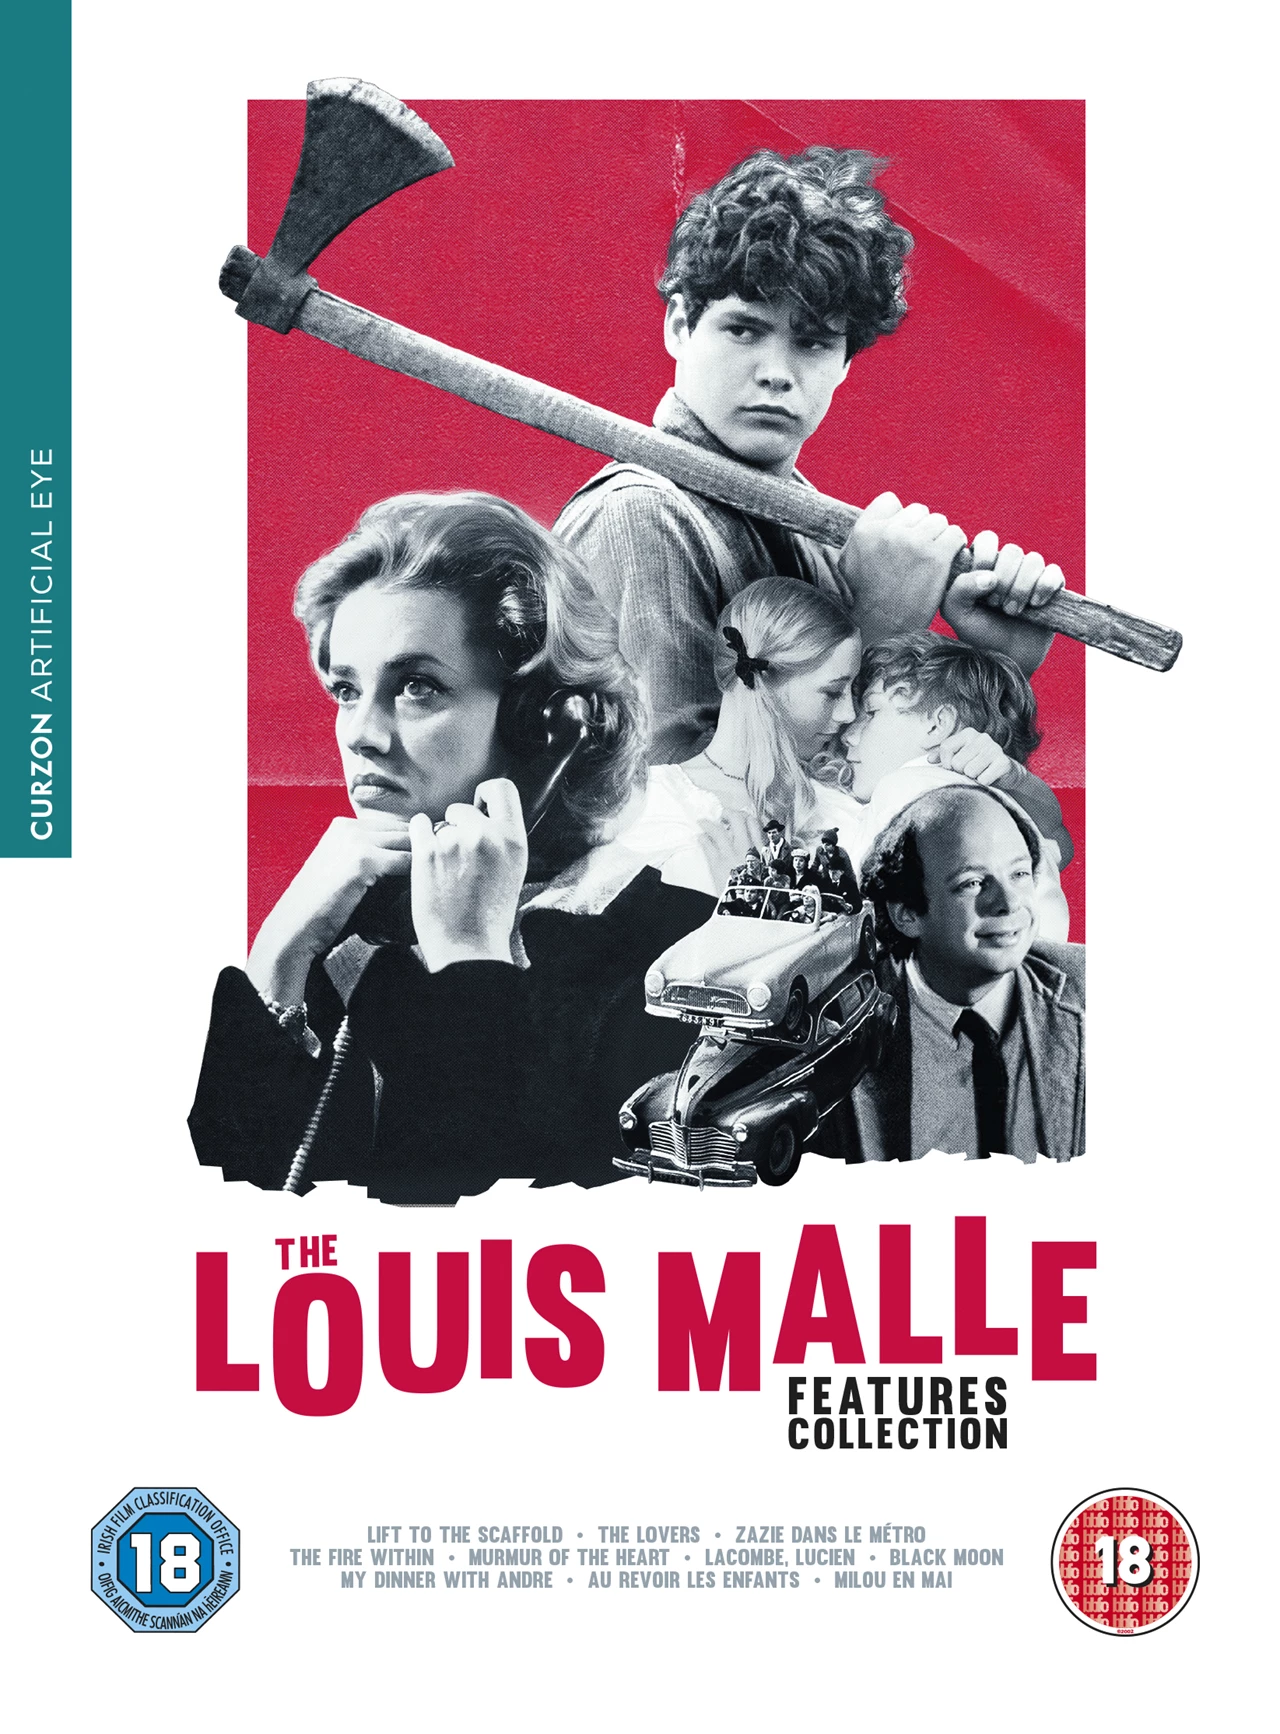 Le Feu Follet (The Fire Within) Louis Malle Blu-ray